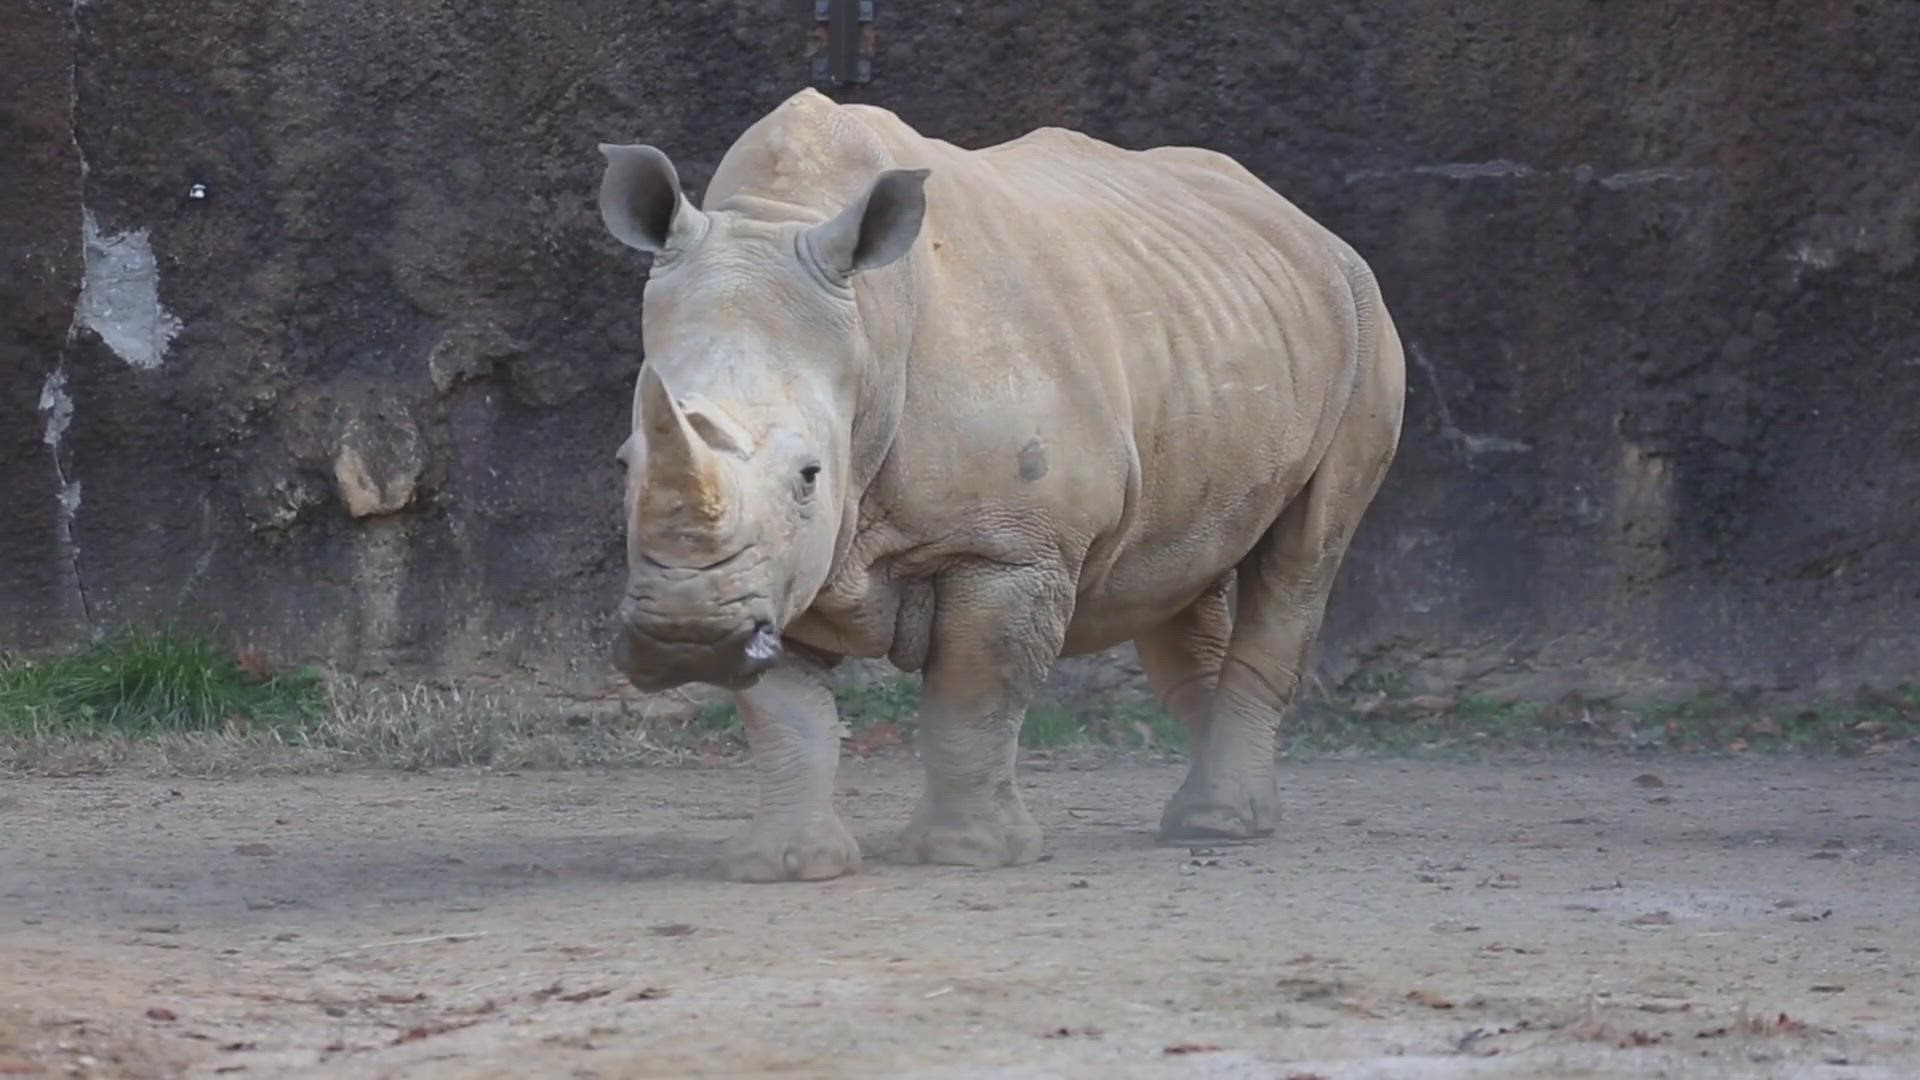 At 54 years old, Polly was one of the oldest rhinos in the U.S. She died on Friday morning.